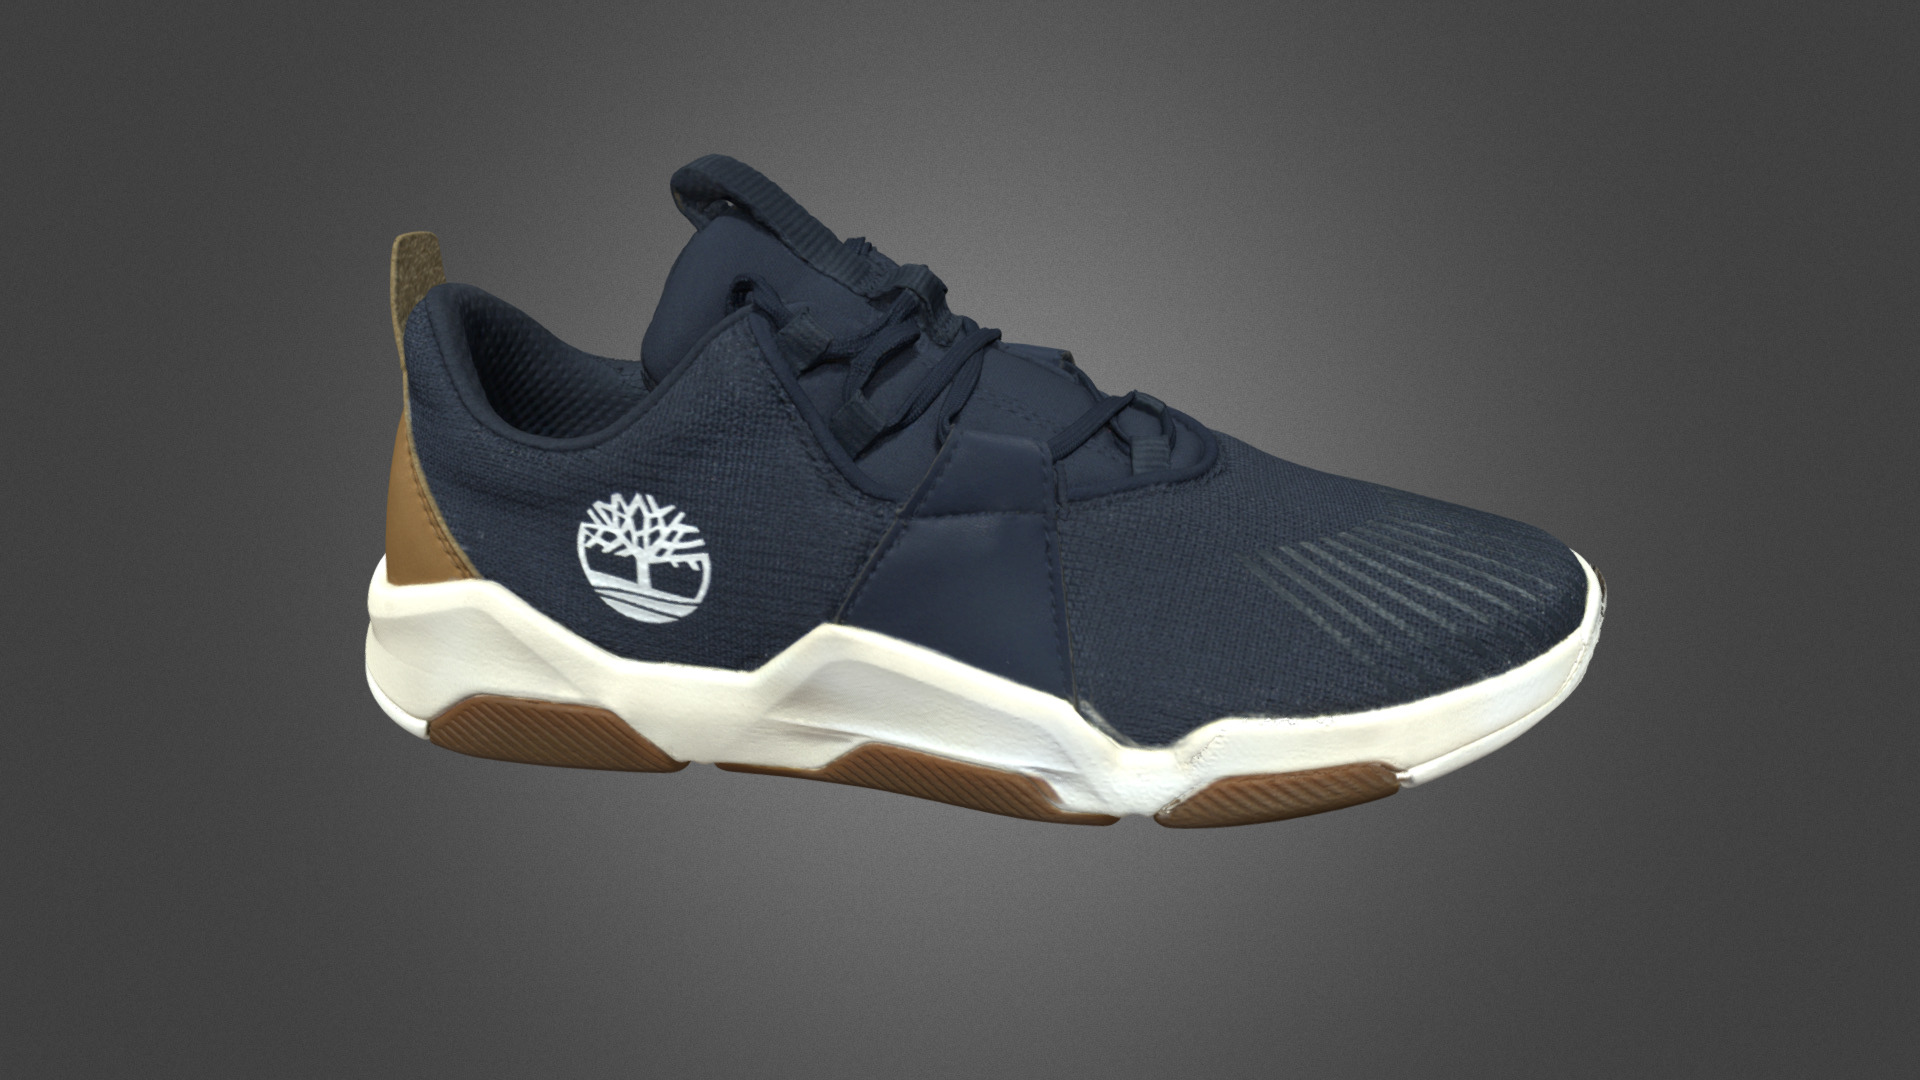 3D model Timberland Earth Rally Navy Blue - This is a 3D model of the Timberland Earth Rally Navy Blue. The 3D model is about a black and white shoe.